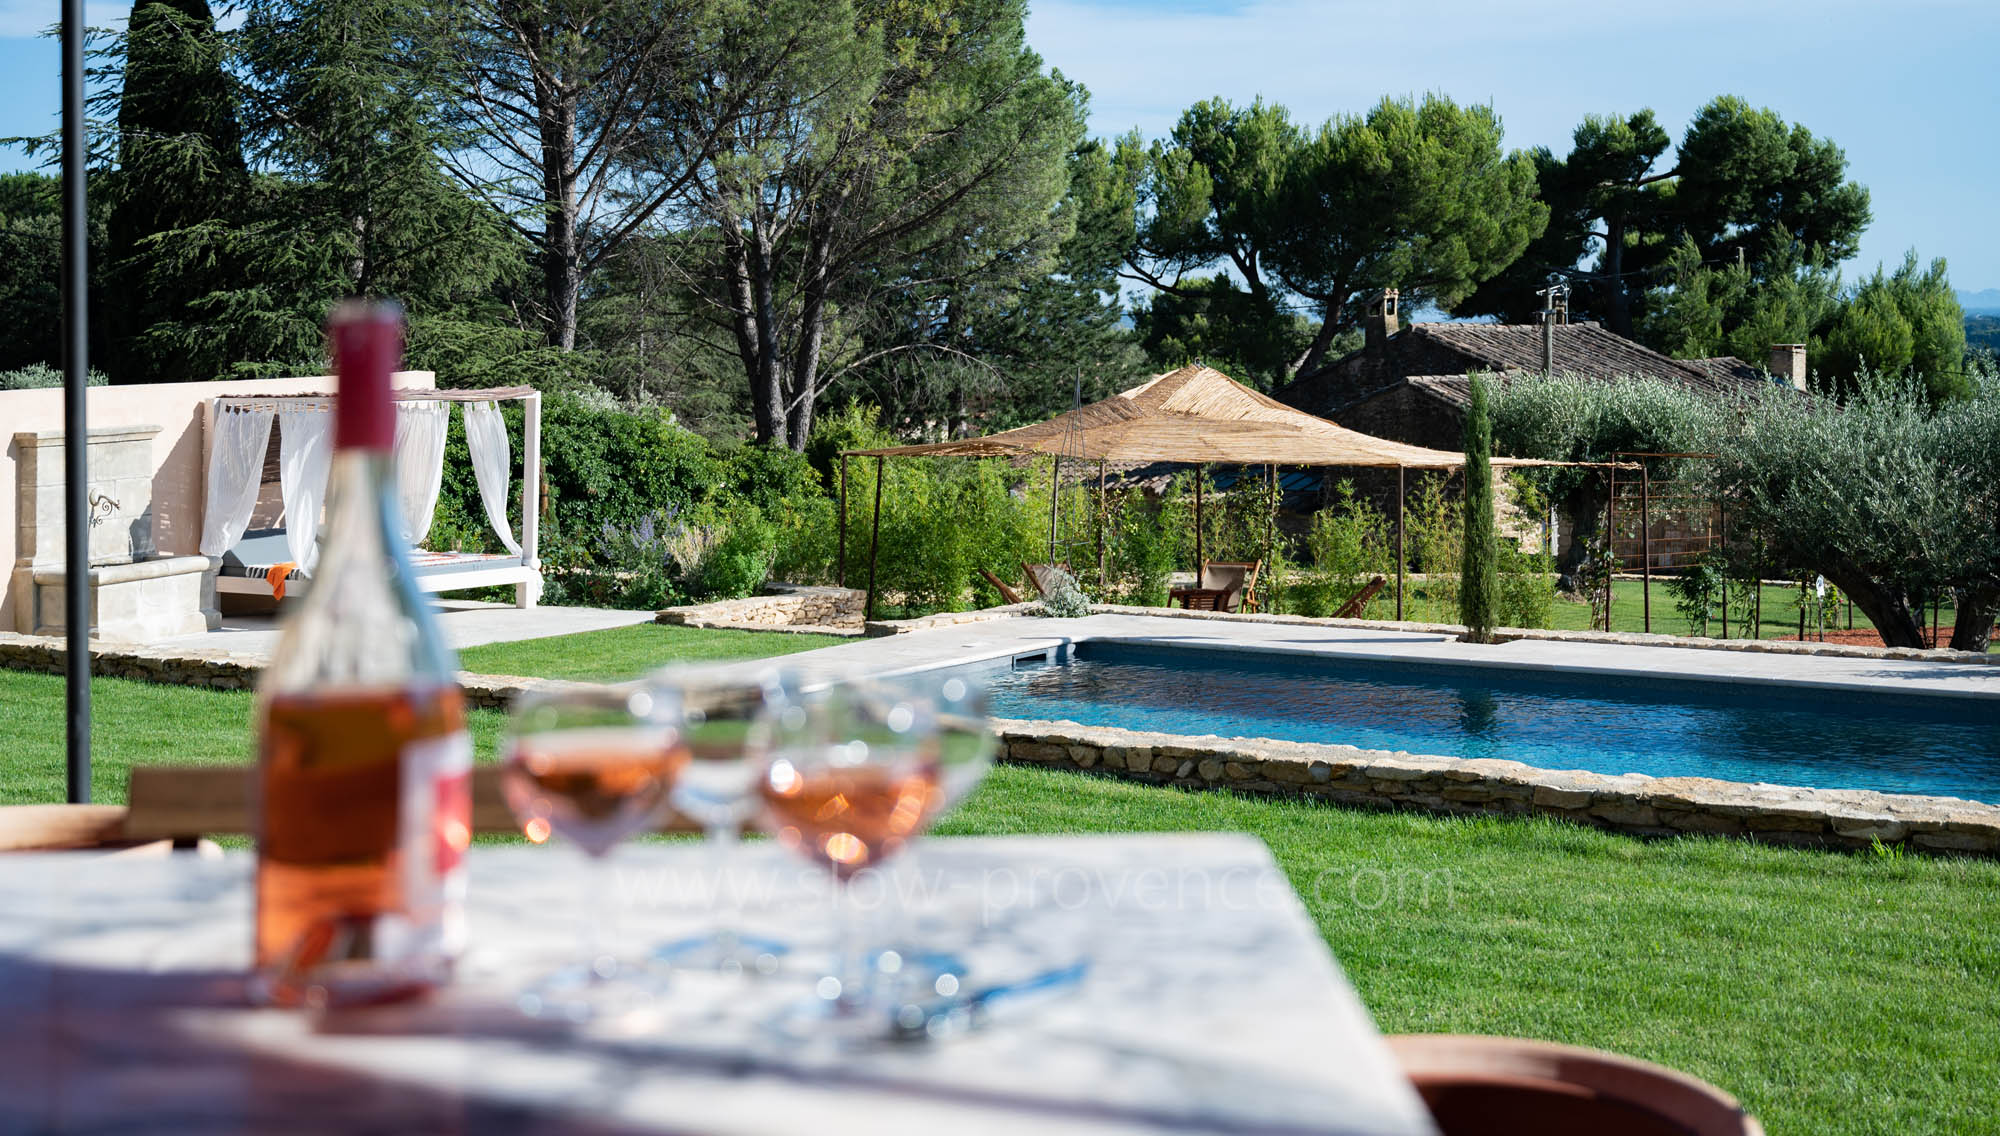 A glass of rosé, cicadas and a nice swimming pool